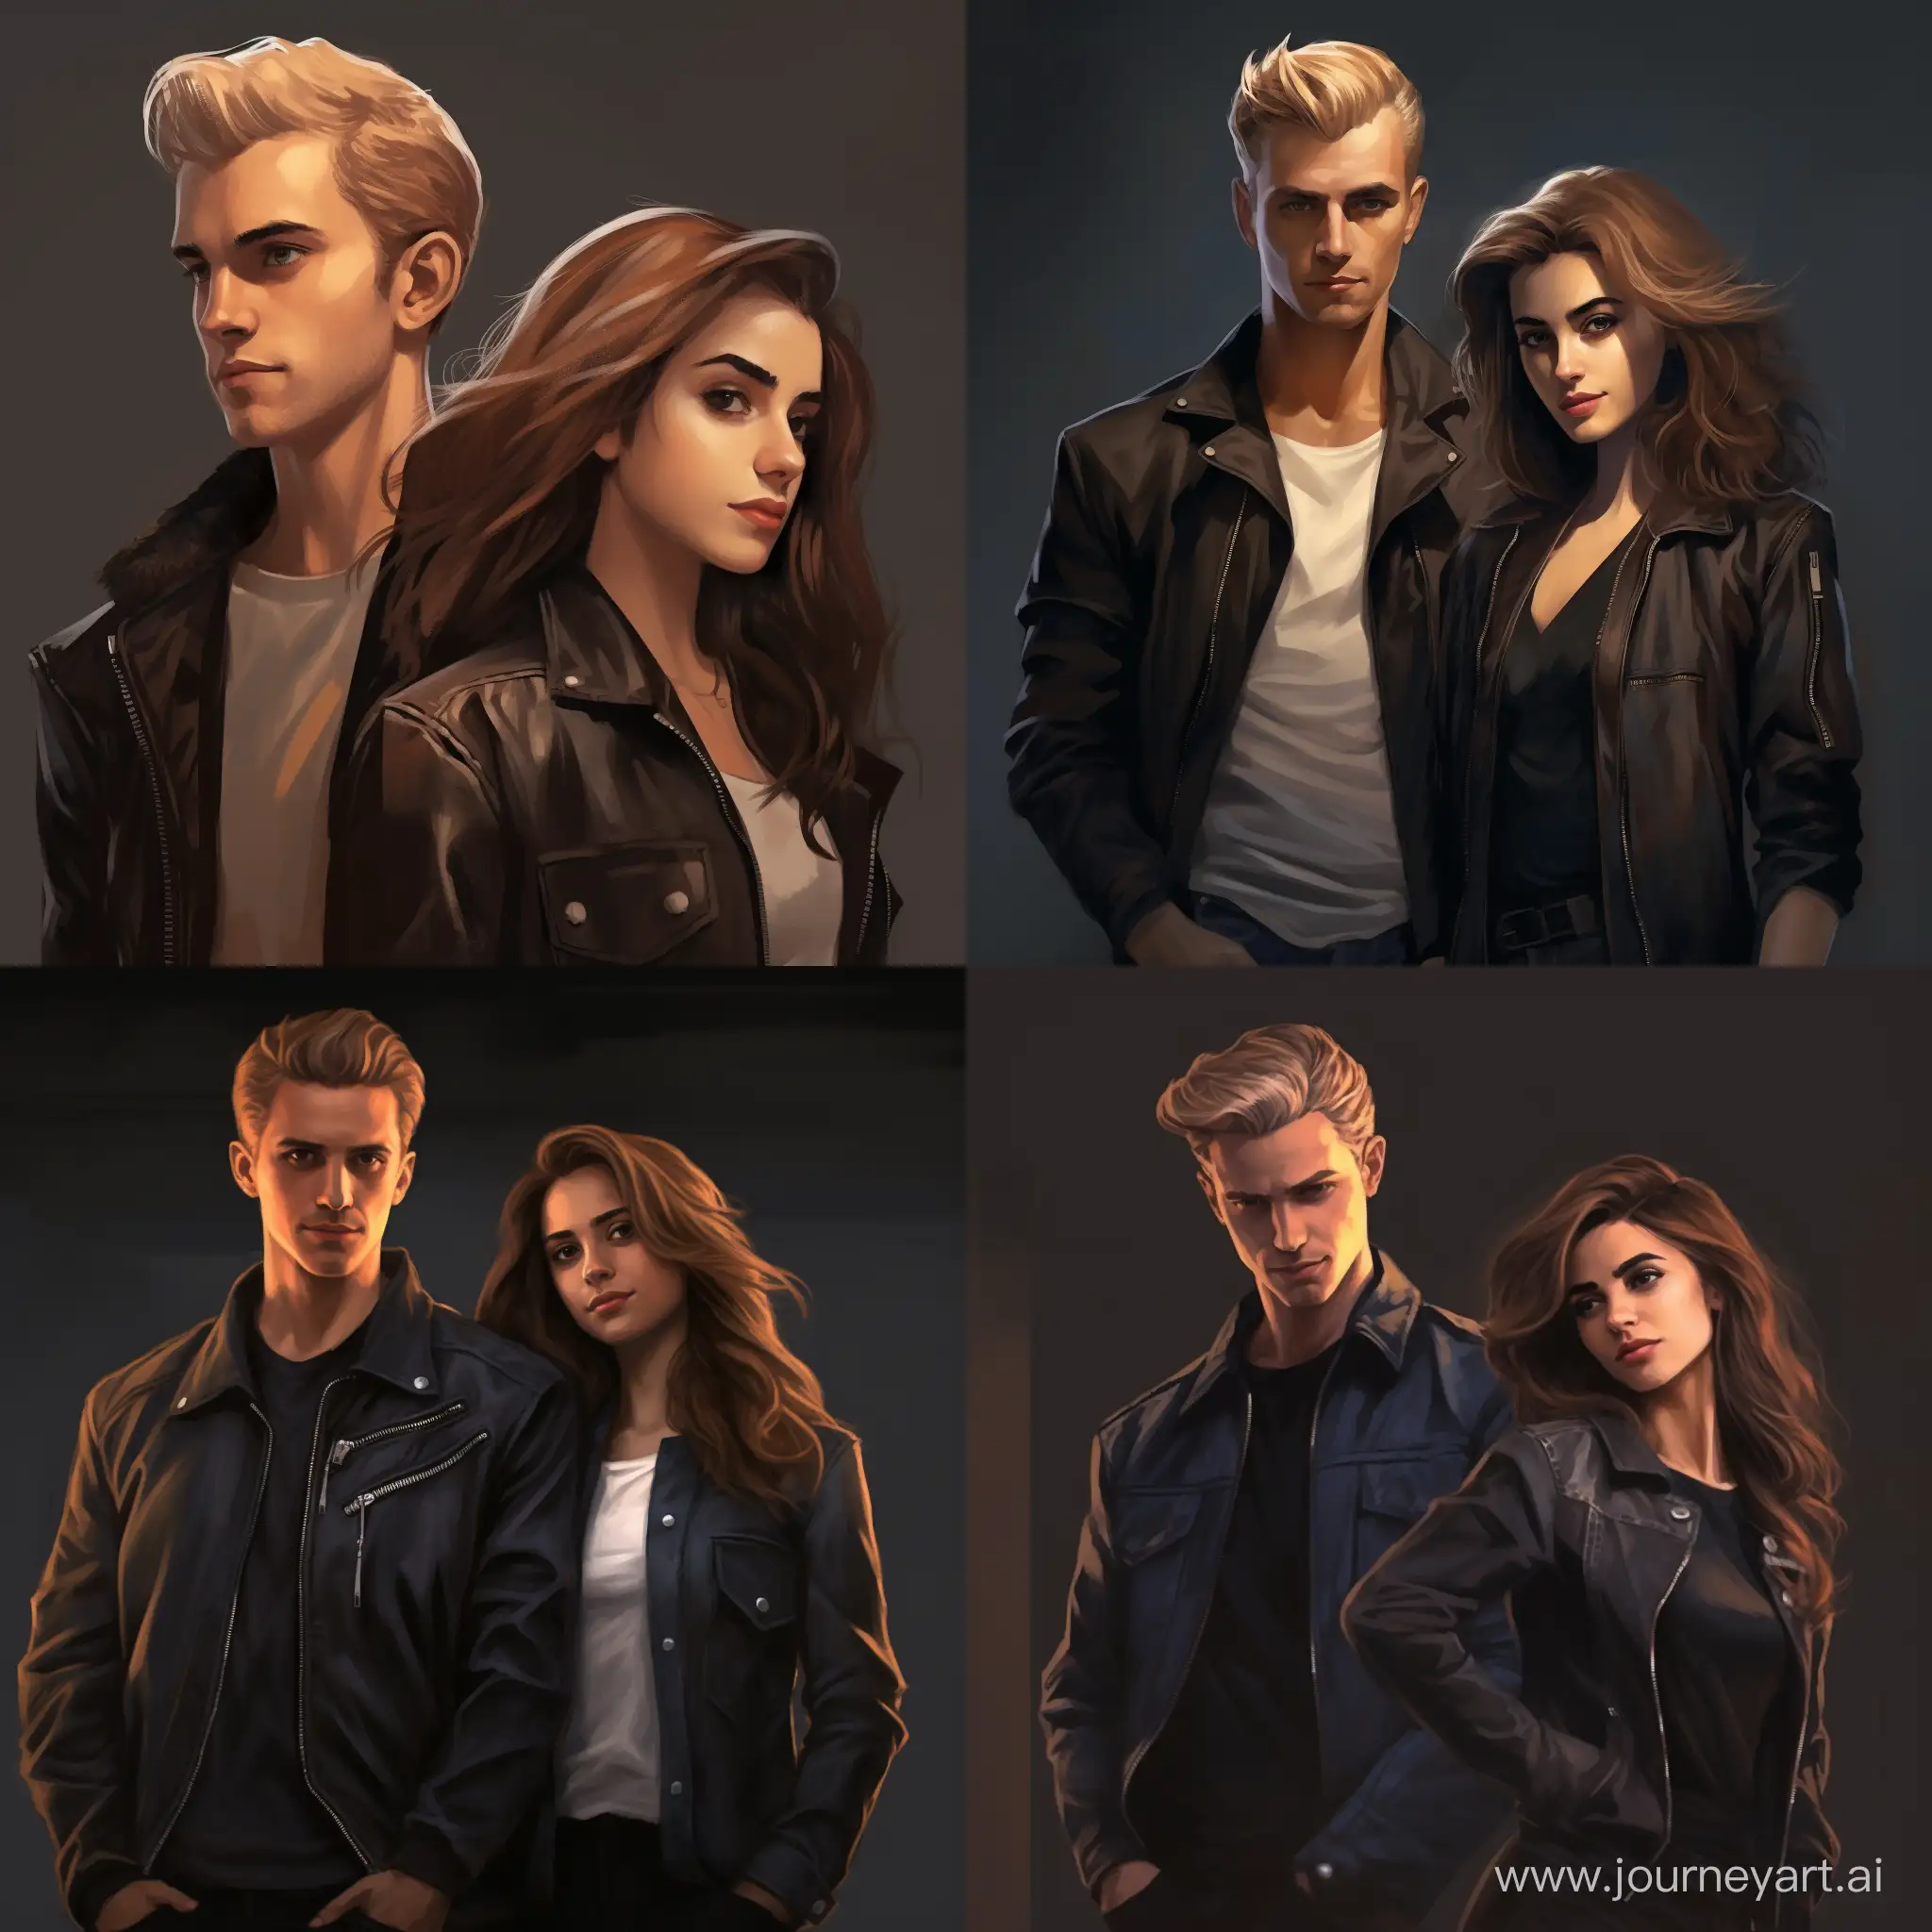 Draco Malfoy and Hermione Granger. Hermione is brunette and wearing a shirt, and Draco is wearing a leather jacket